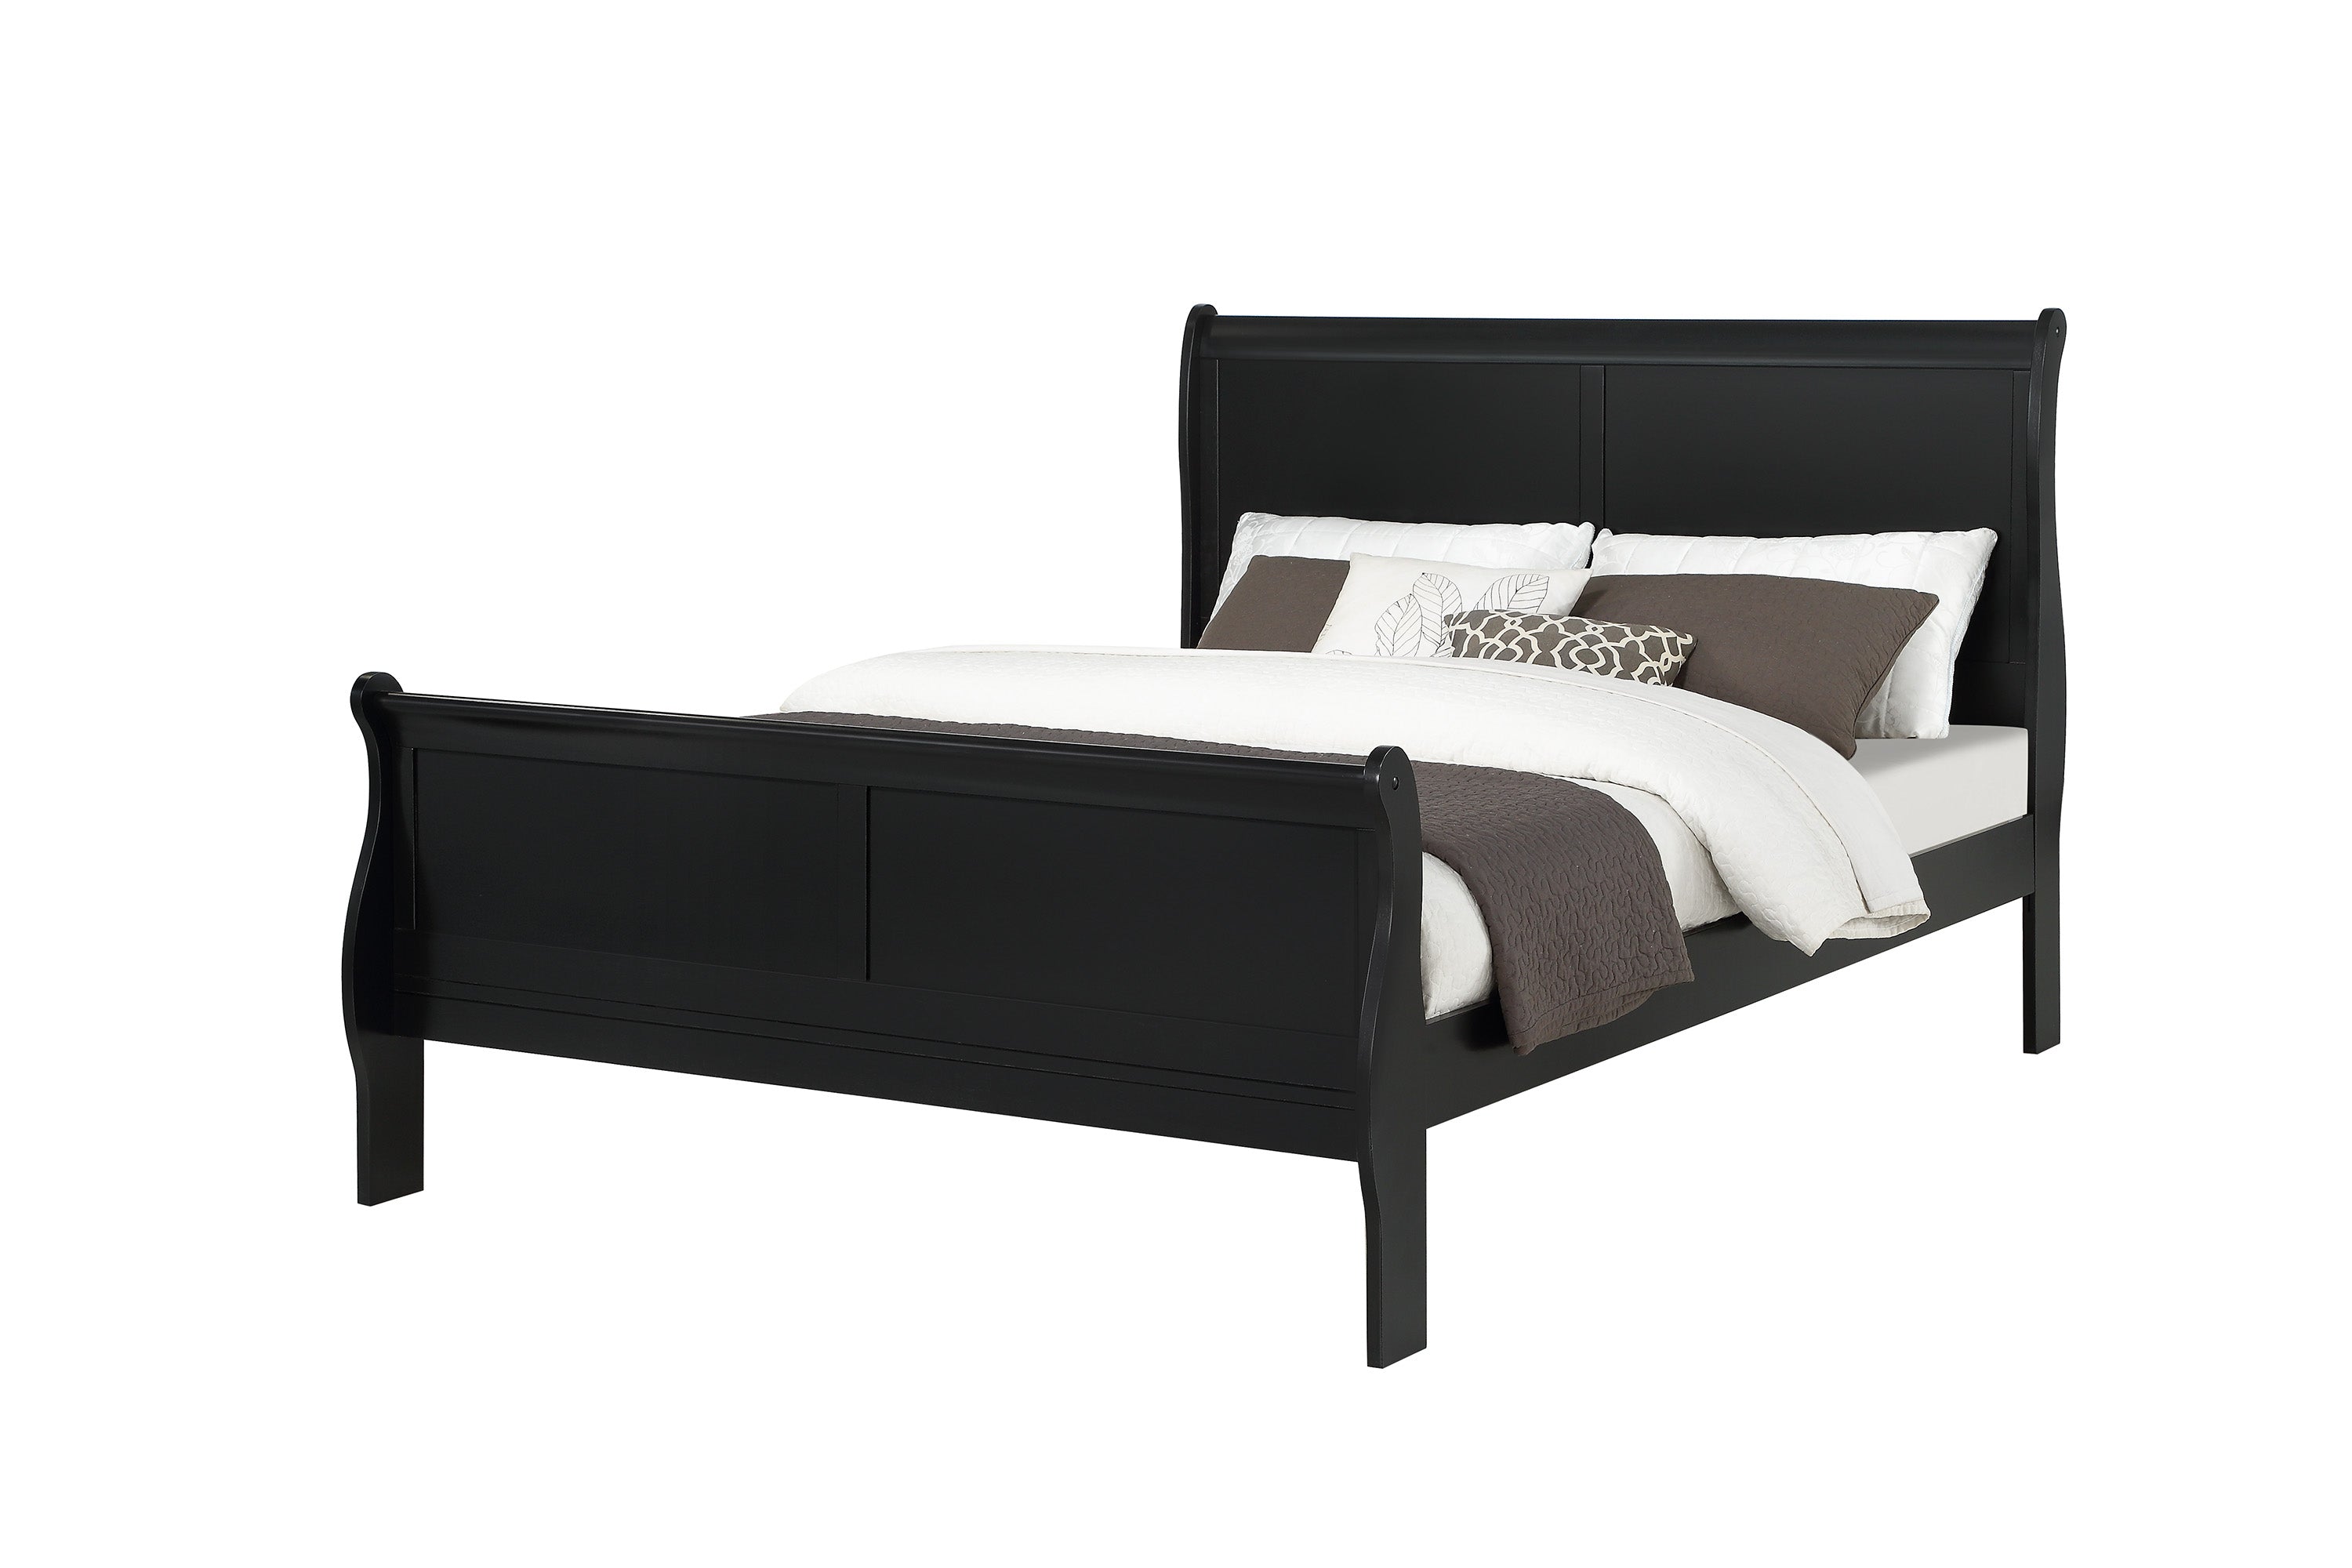 Passion Furniture Louis Philippe Black King Sleigh Wood Bed with High Footboard